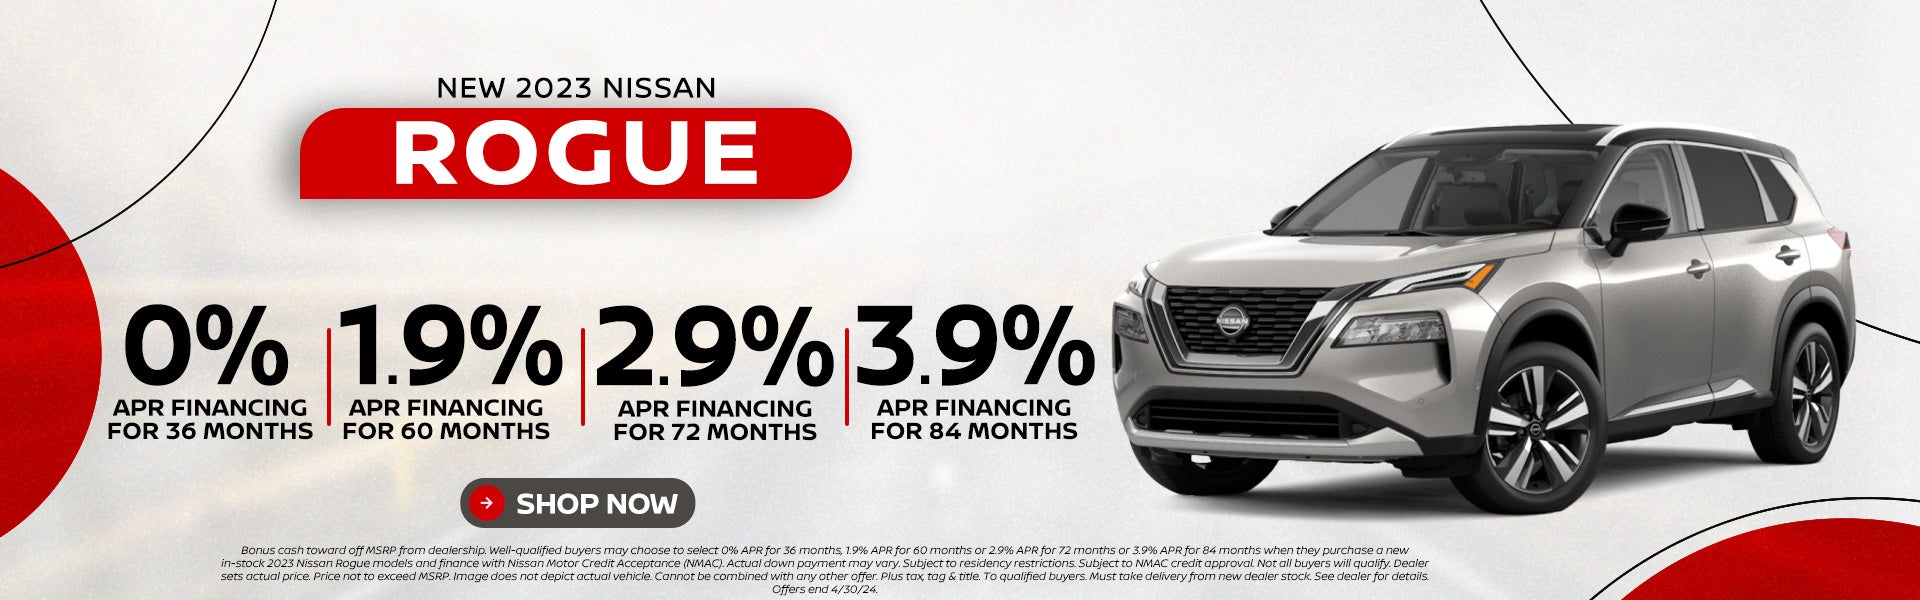 2023' Rogue 0% APR for 36 months | 1.9%APR for 60 months | 2